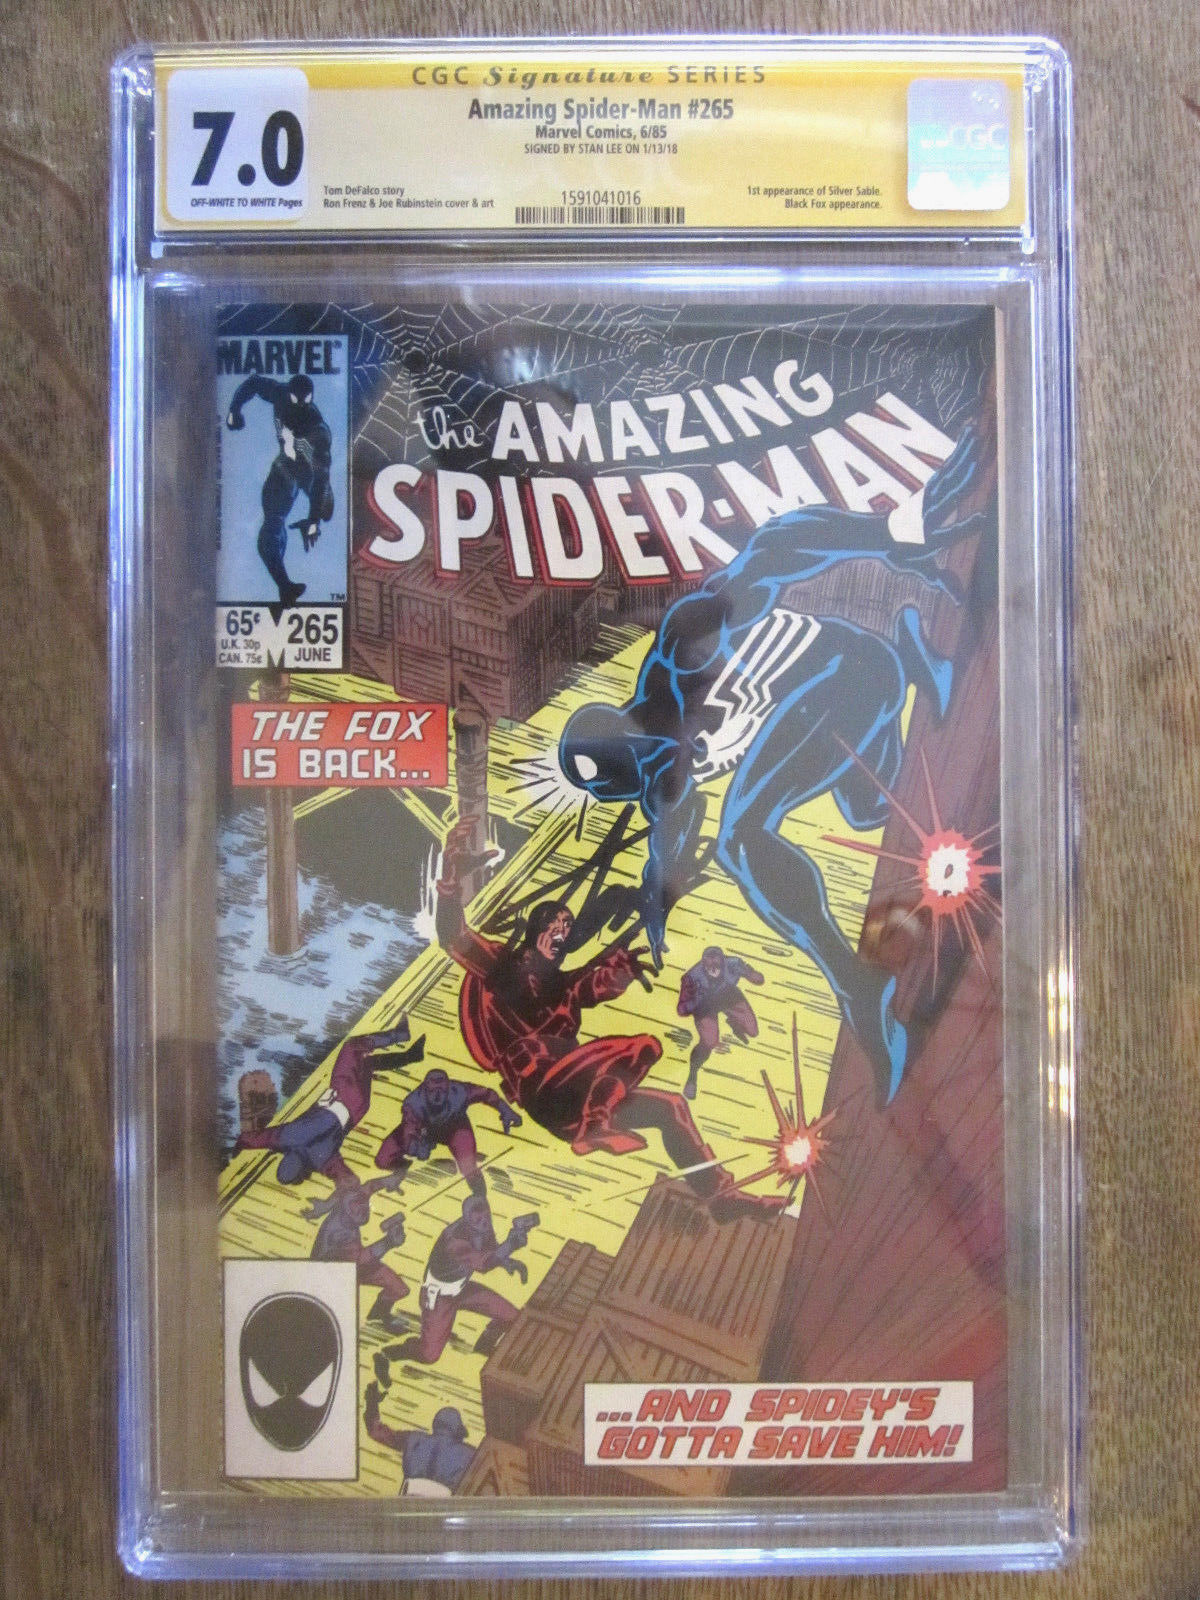 AMAZING SPIDER-MAN #265 CGC 7.0 SS Signed STAN LEE 1st SILVER SABLE  Movie